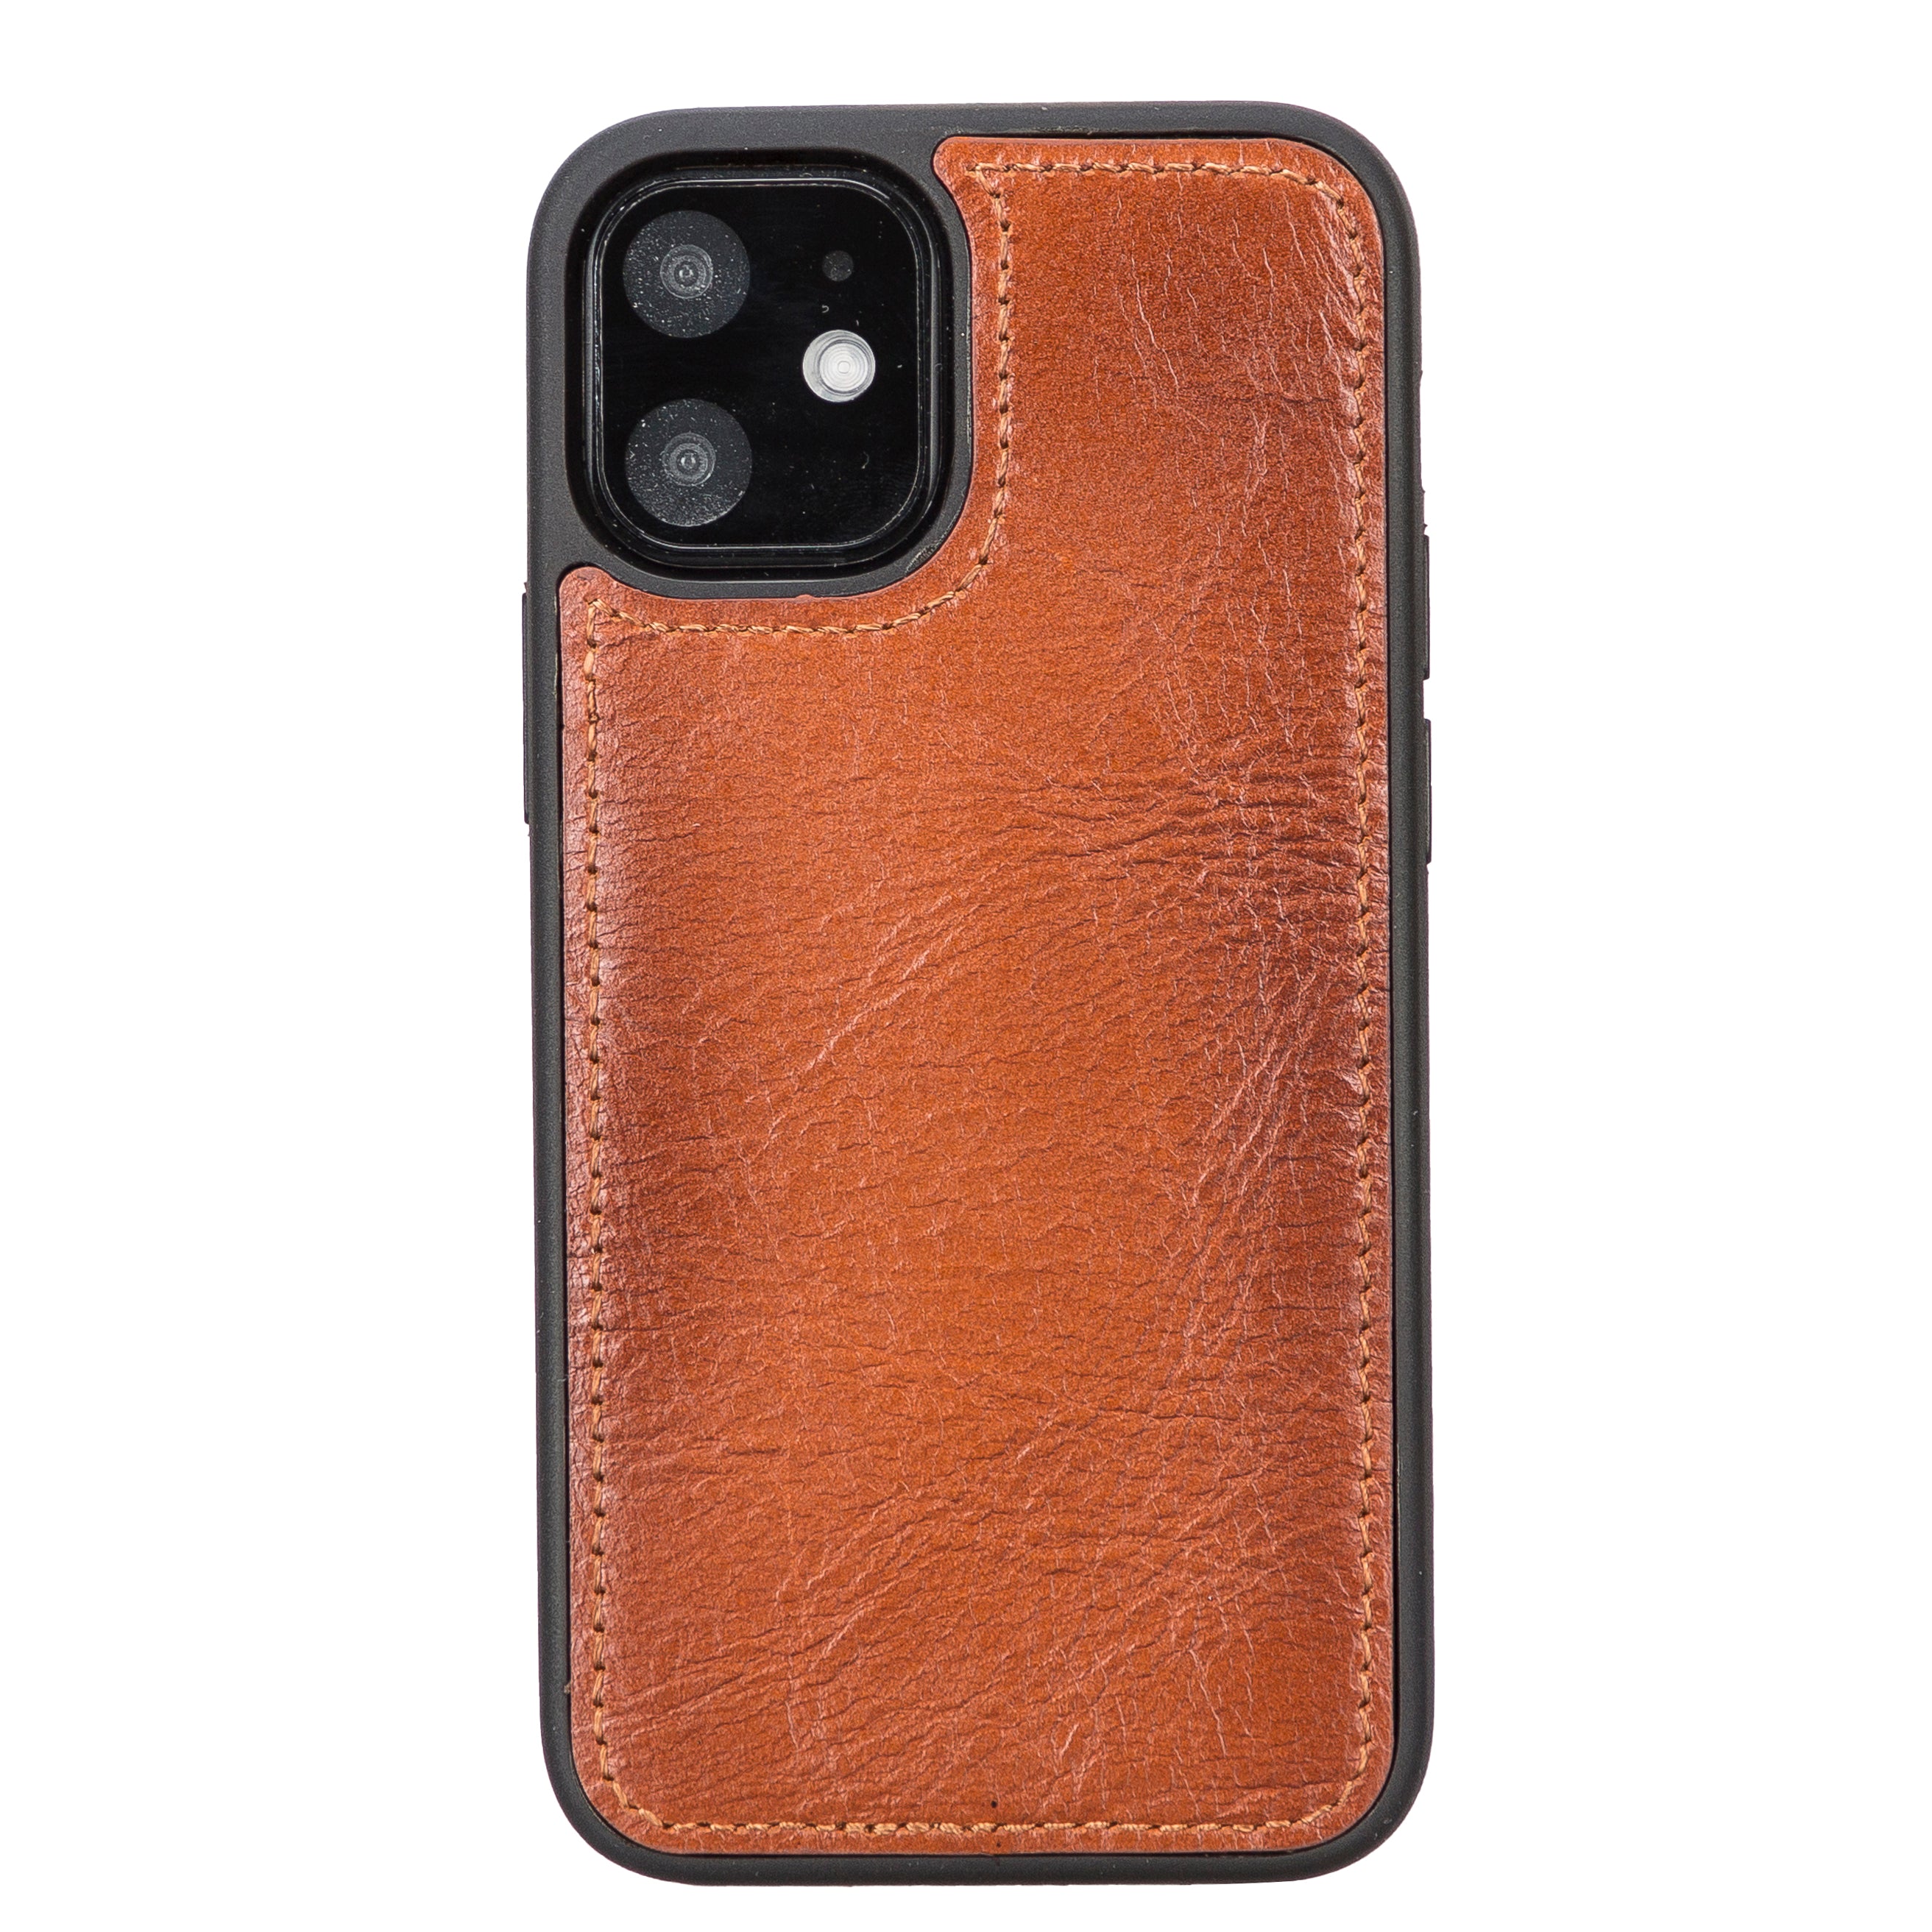 DelfiCase Leather Magnetic Detachable Wallet Case for iPhone 12 Mini (5.4") 27